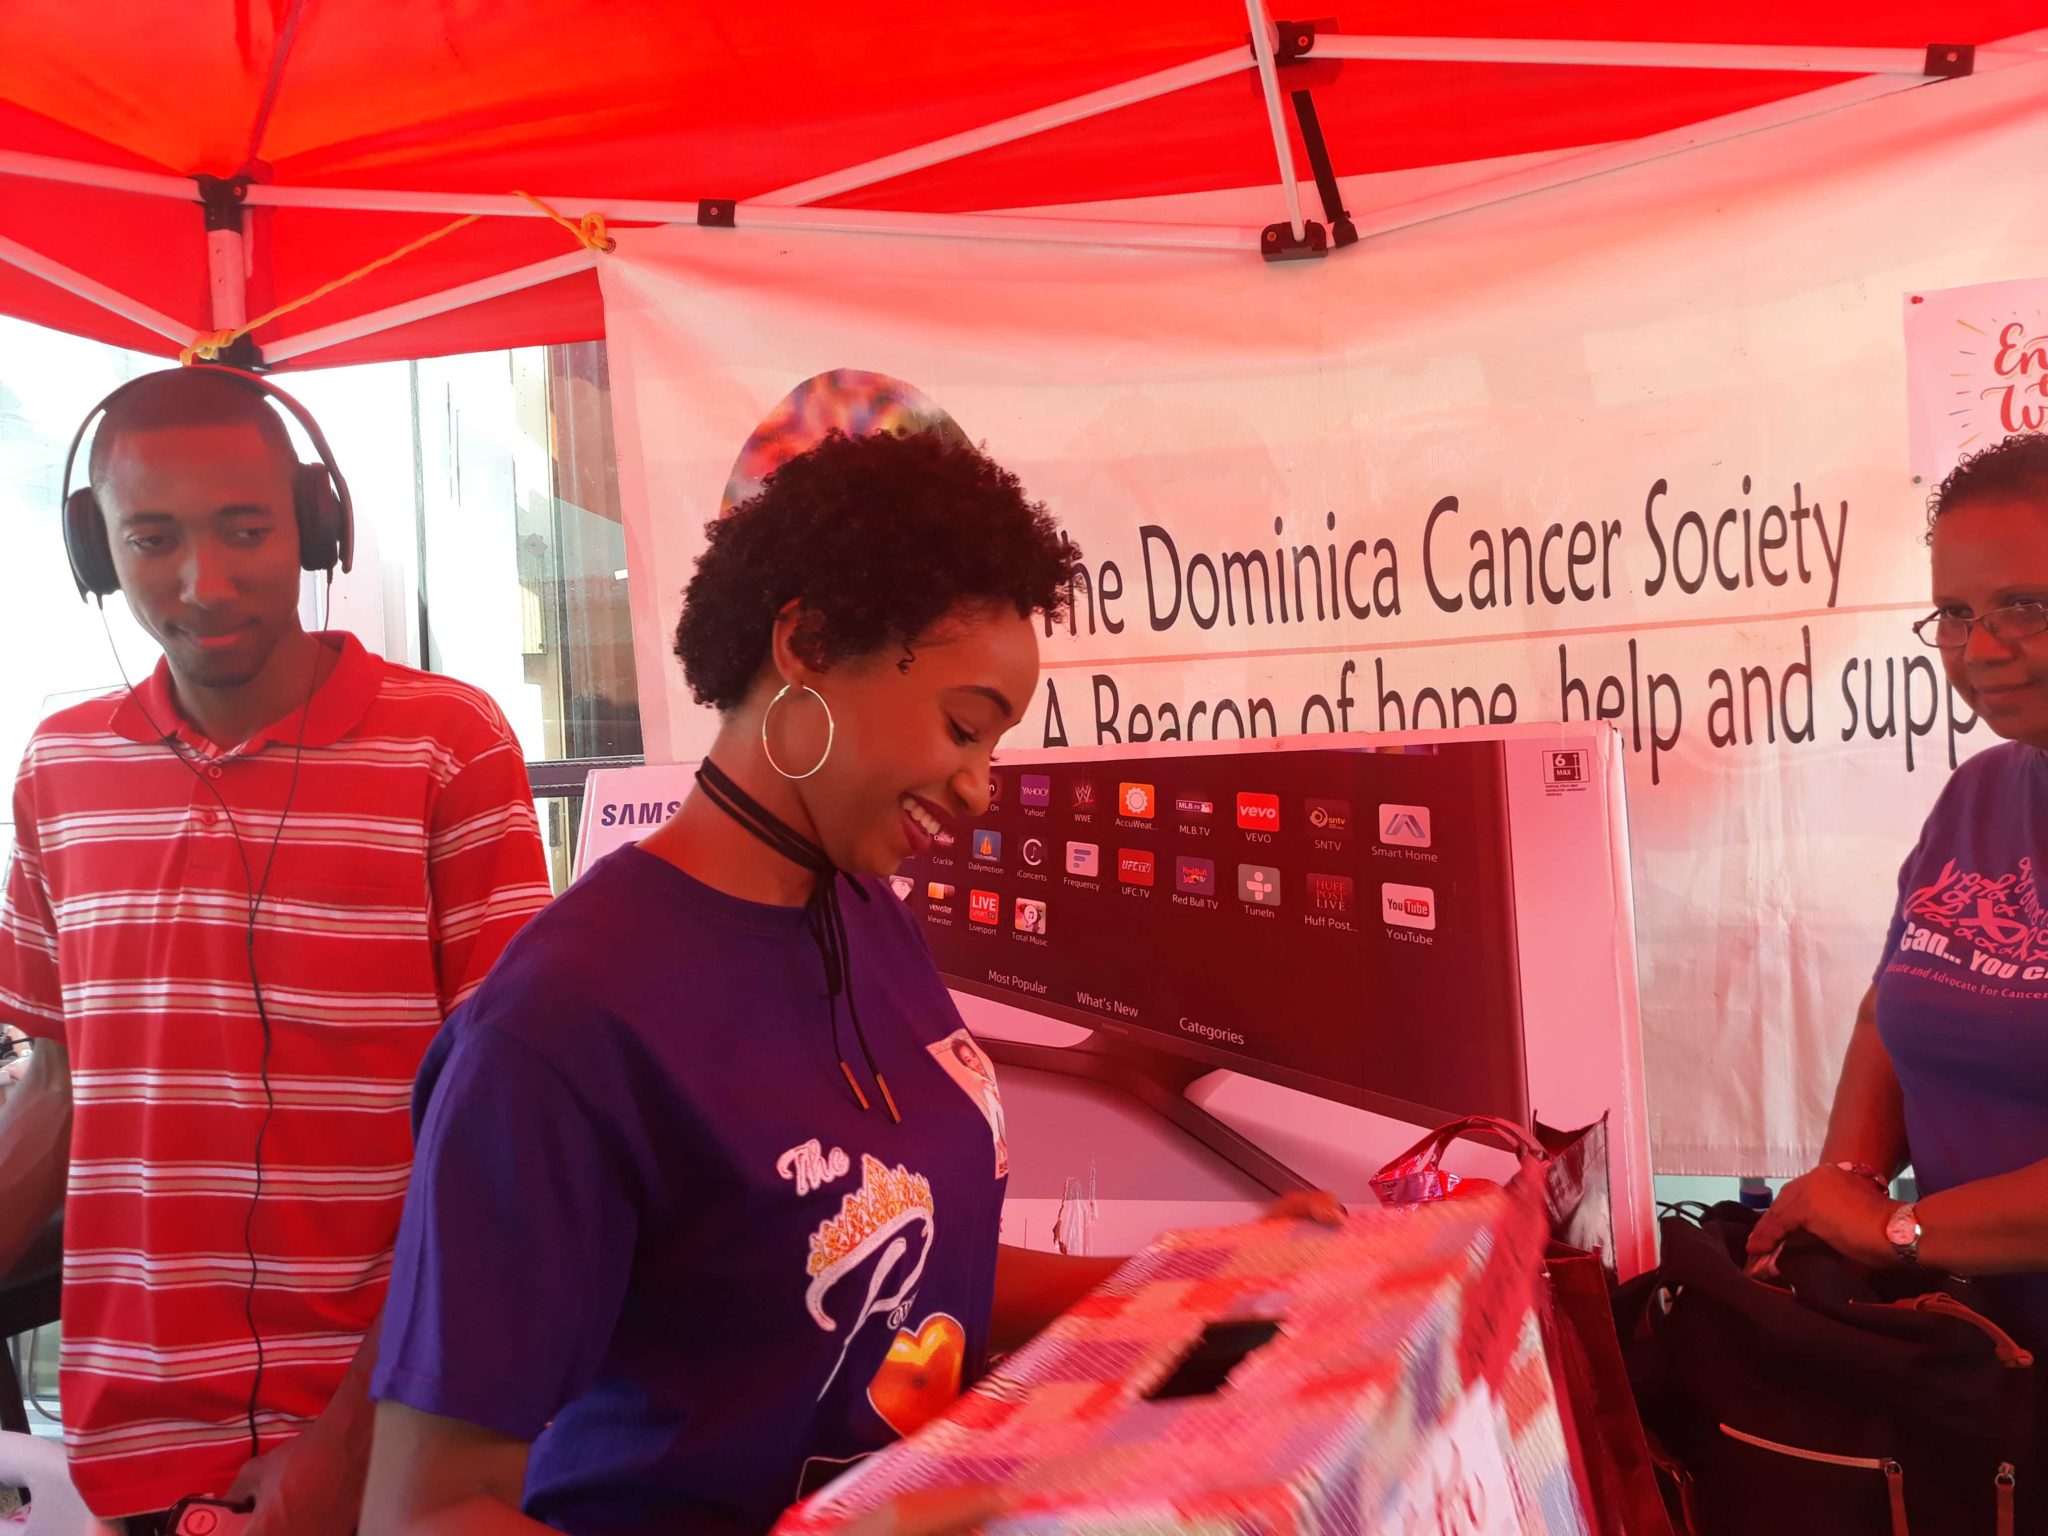 The Dominica Cancer Society Held A Fundraising Event To Help Cancer Patients